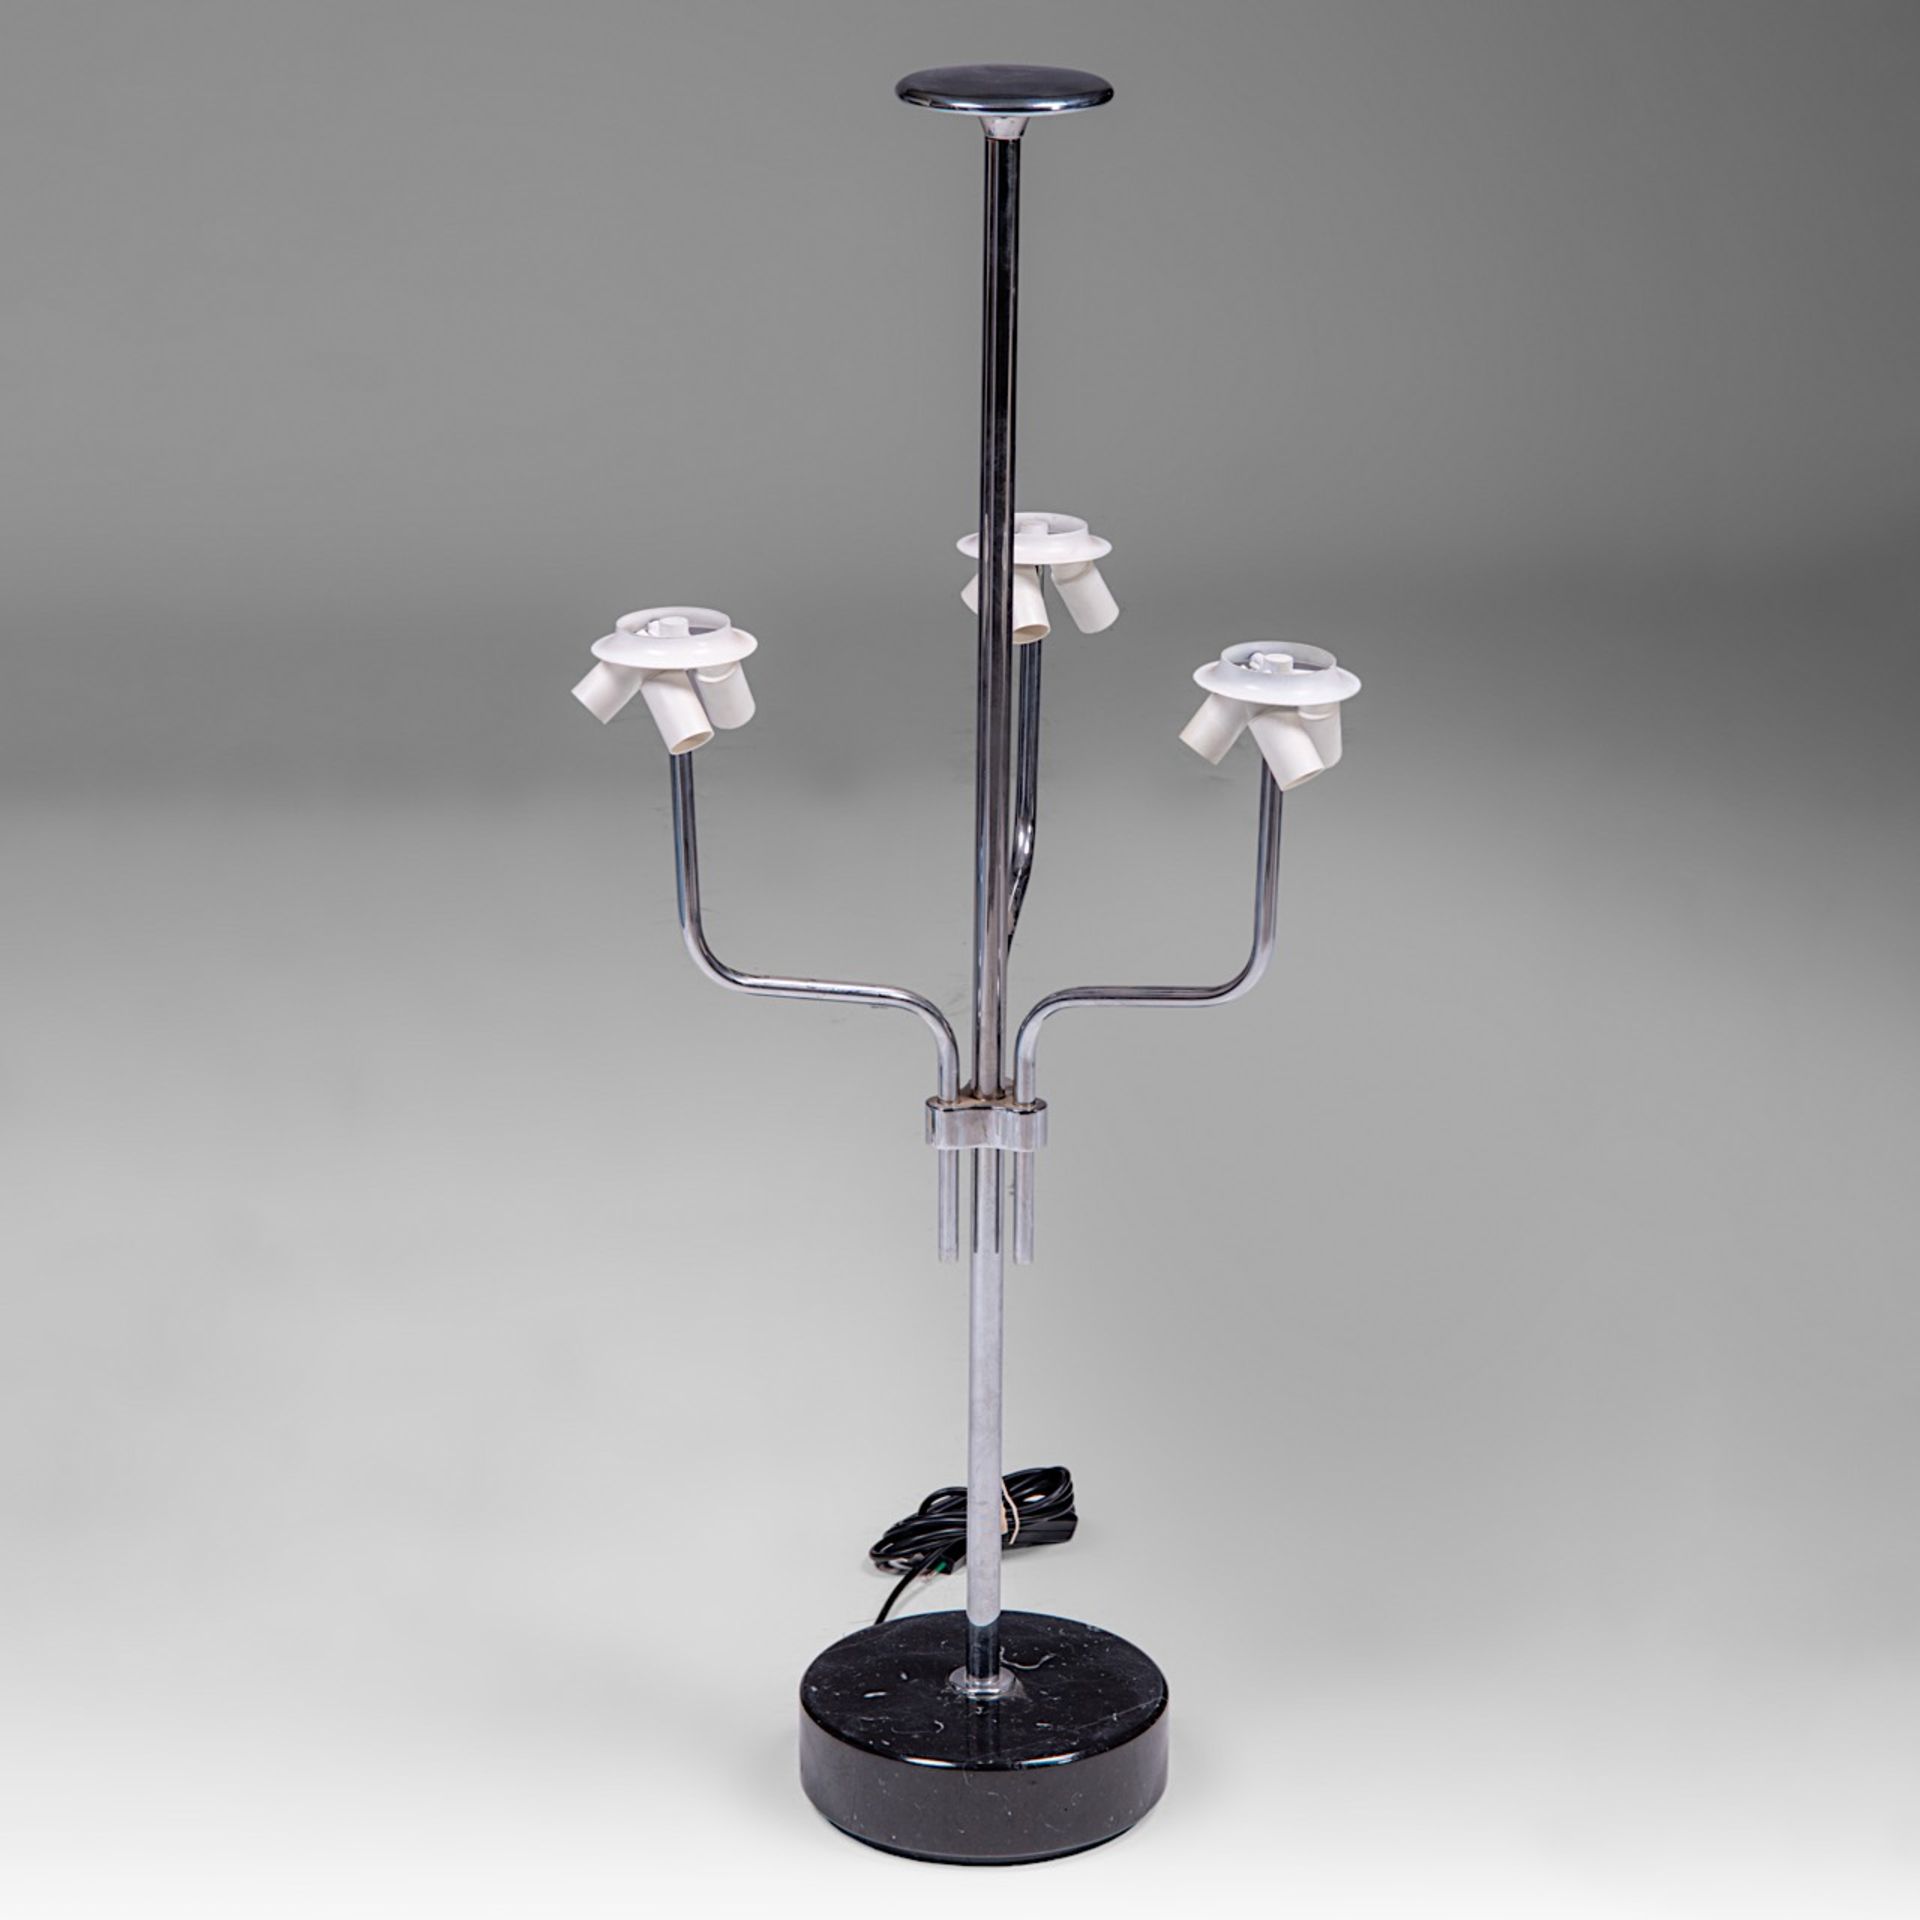 A chrome and opaline glass 3-light table lamp by Ignazio Gardella for Azucena, 2000s - Image 4 of 4